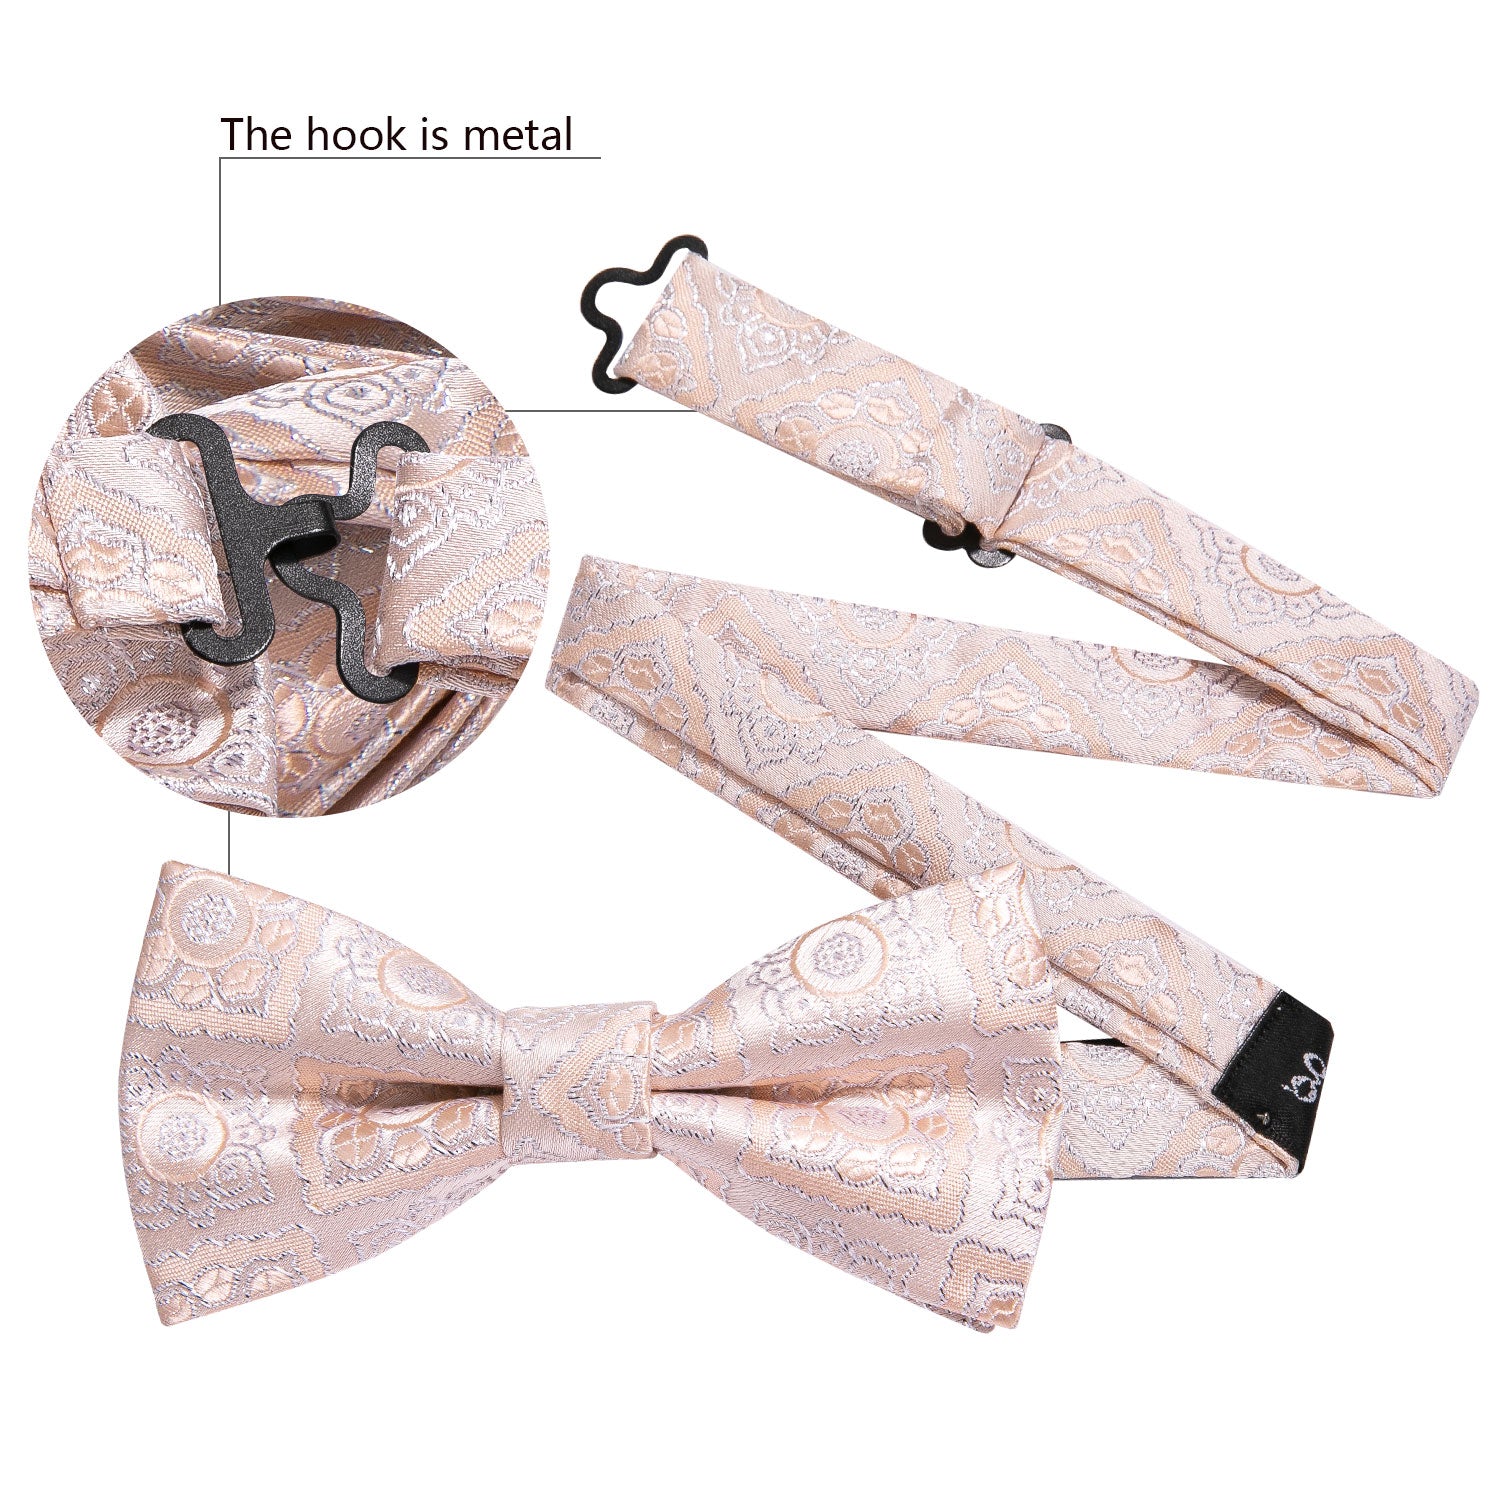 Barry.wang Kids Tie Pink Paisley Silk Children Pre-tied Bow Tie Pocket Square Set